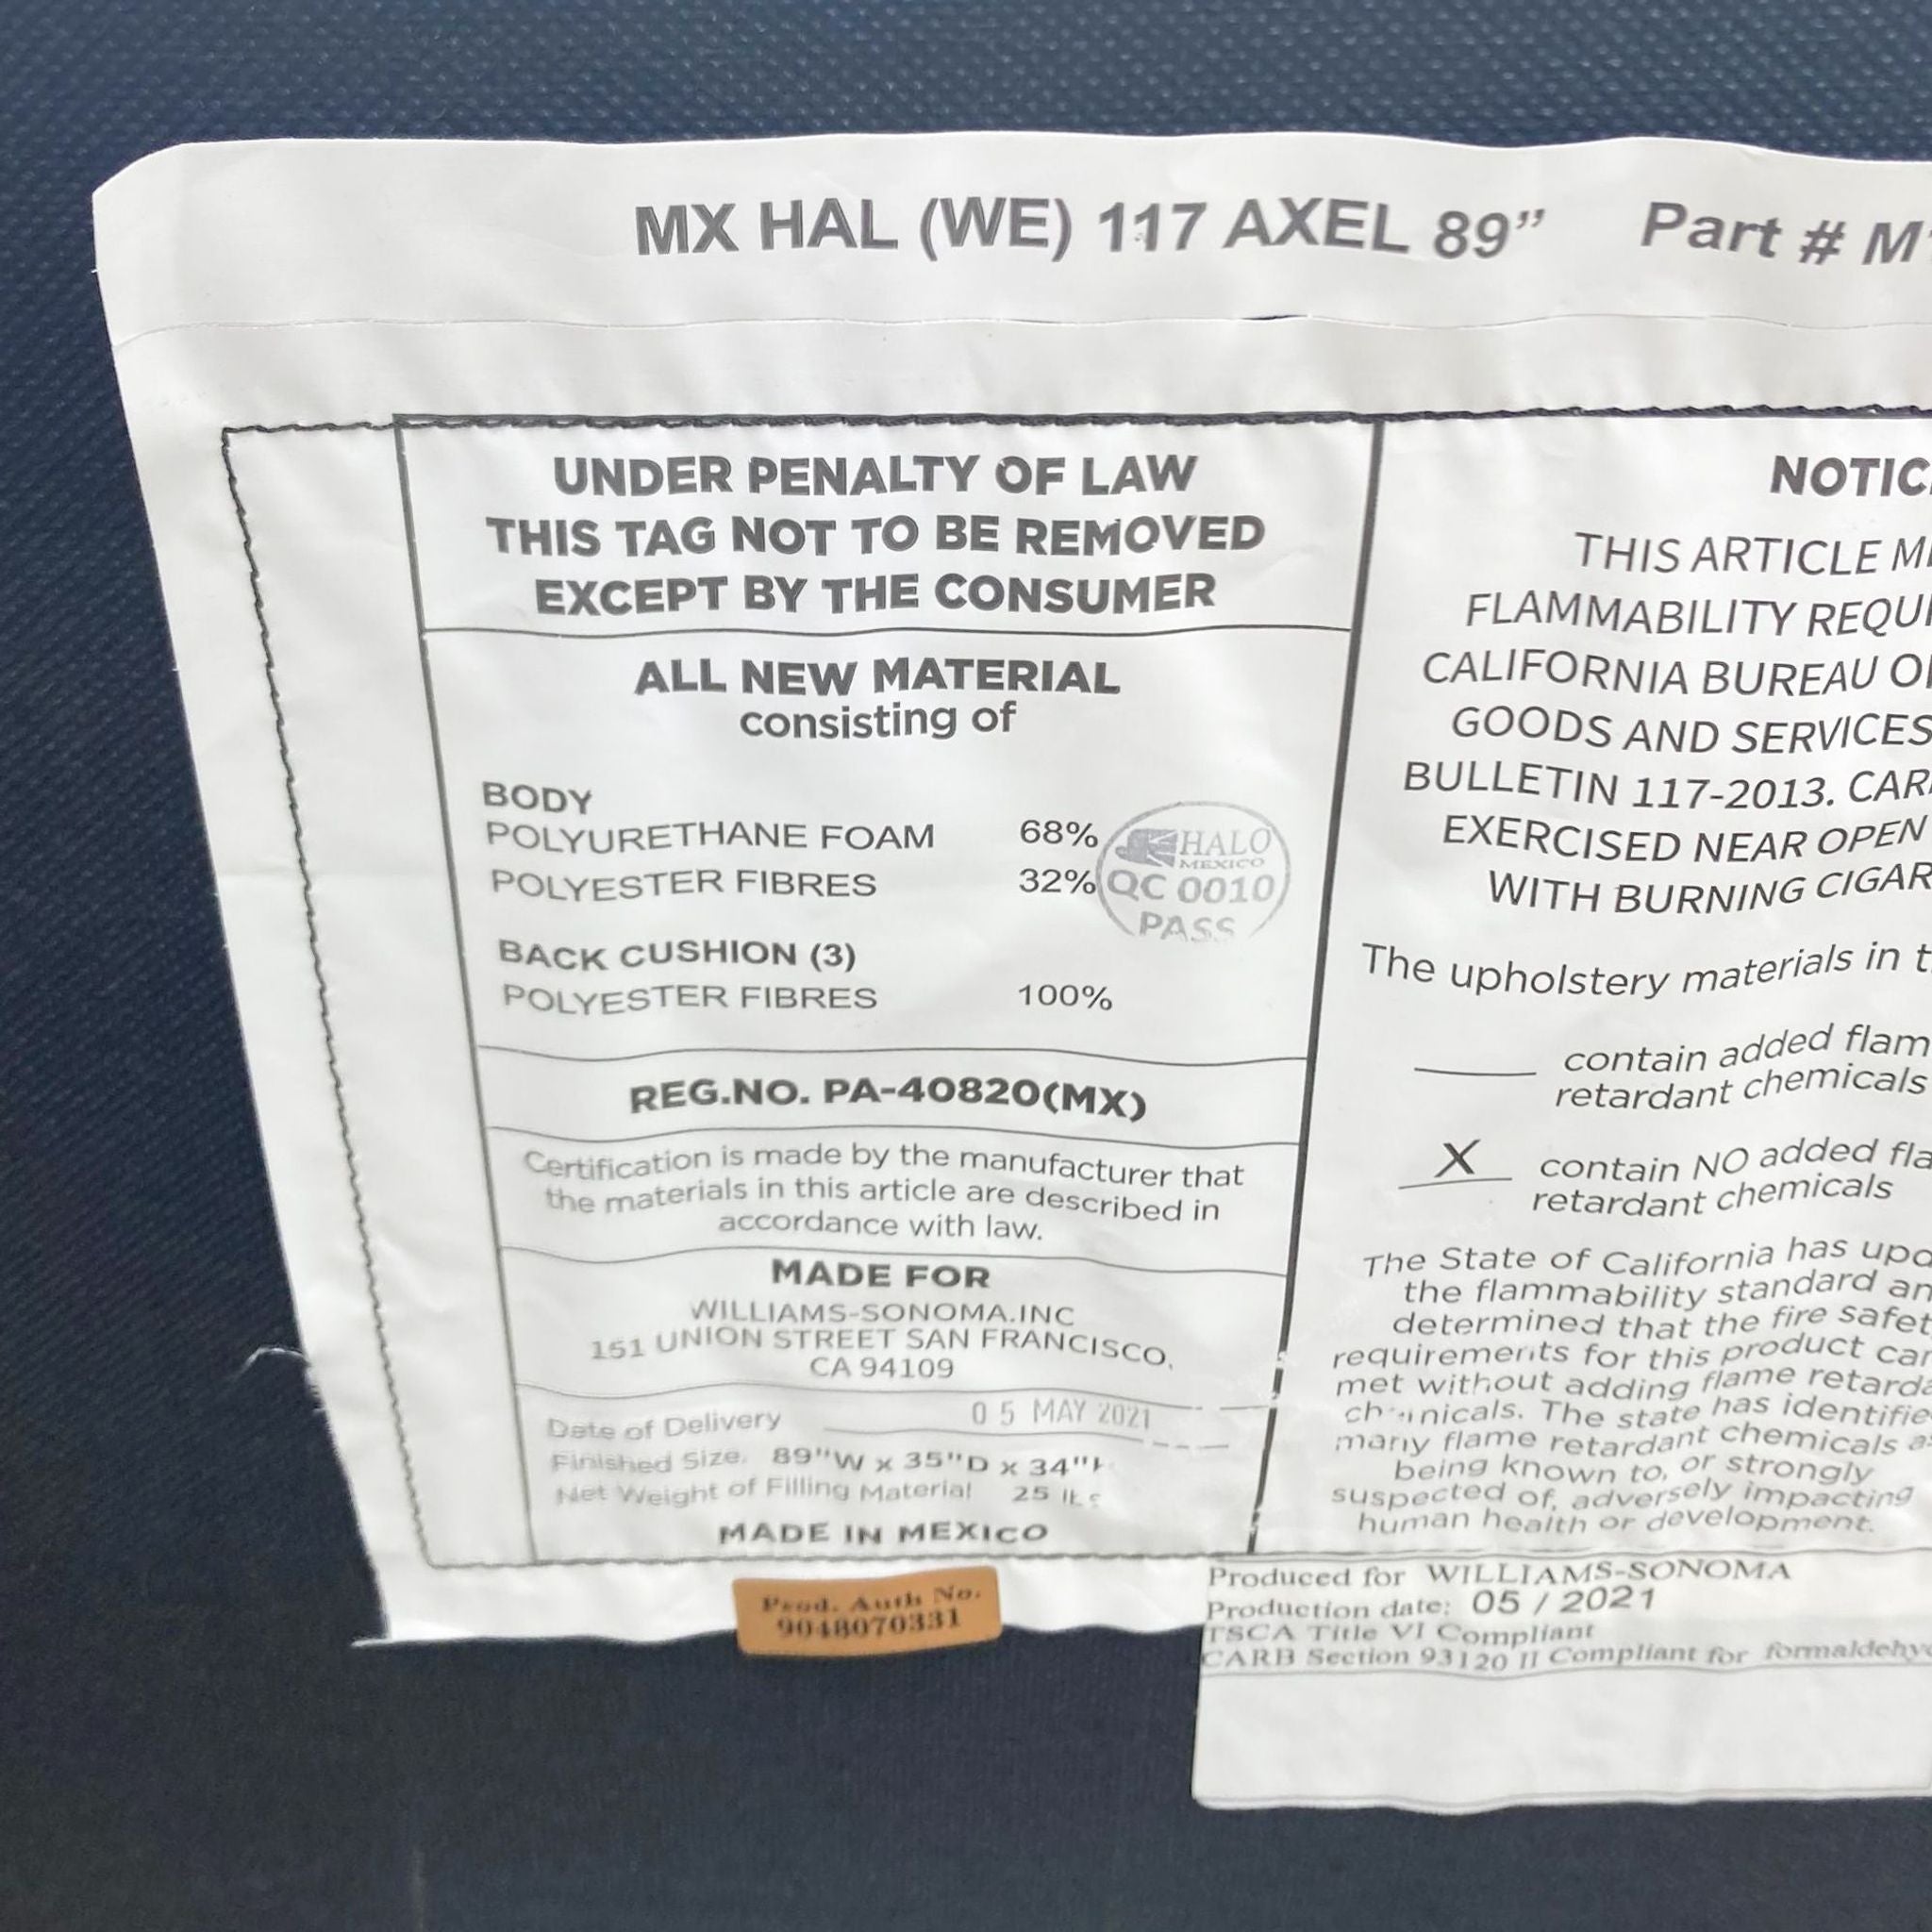 Close-up of a legal tag on a Williams-Sonoma leather sofa detailing materials, compliance information, and manufacturing details.